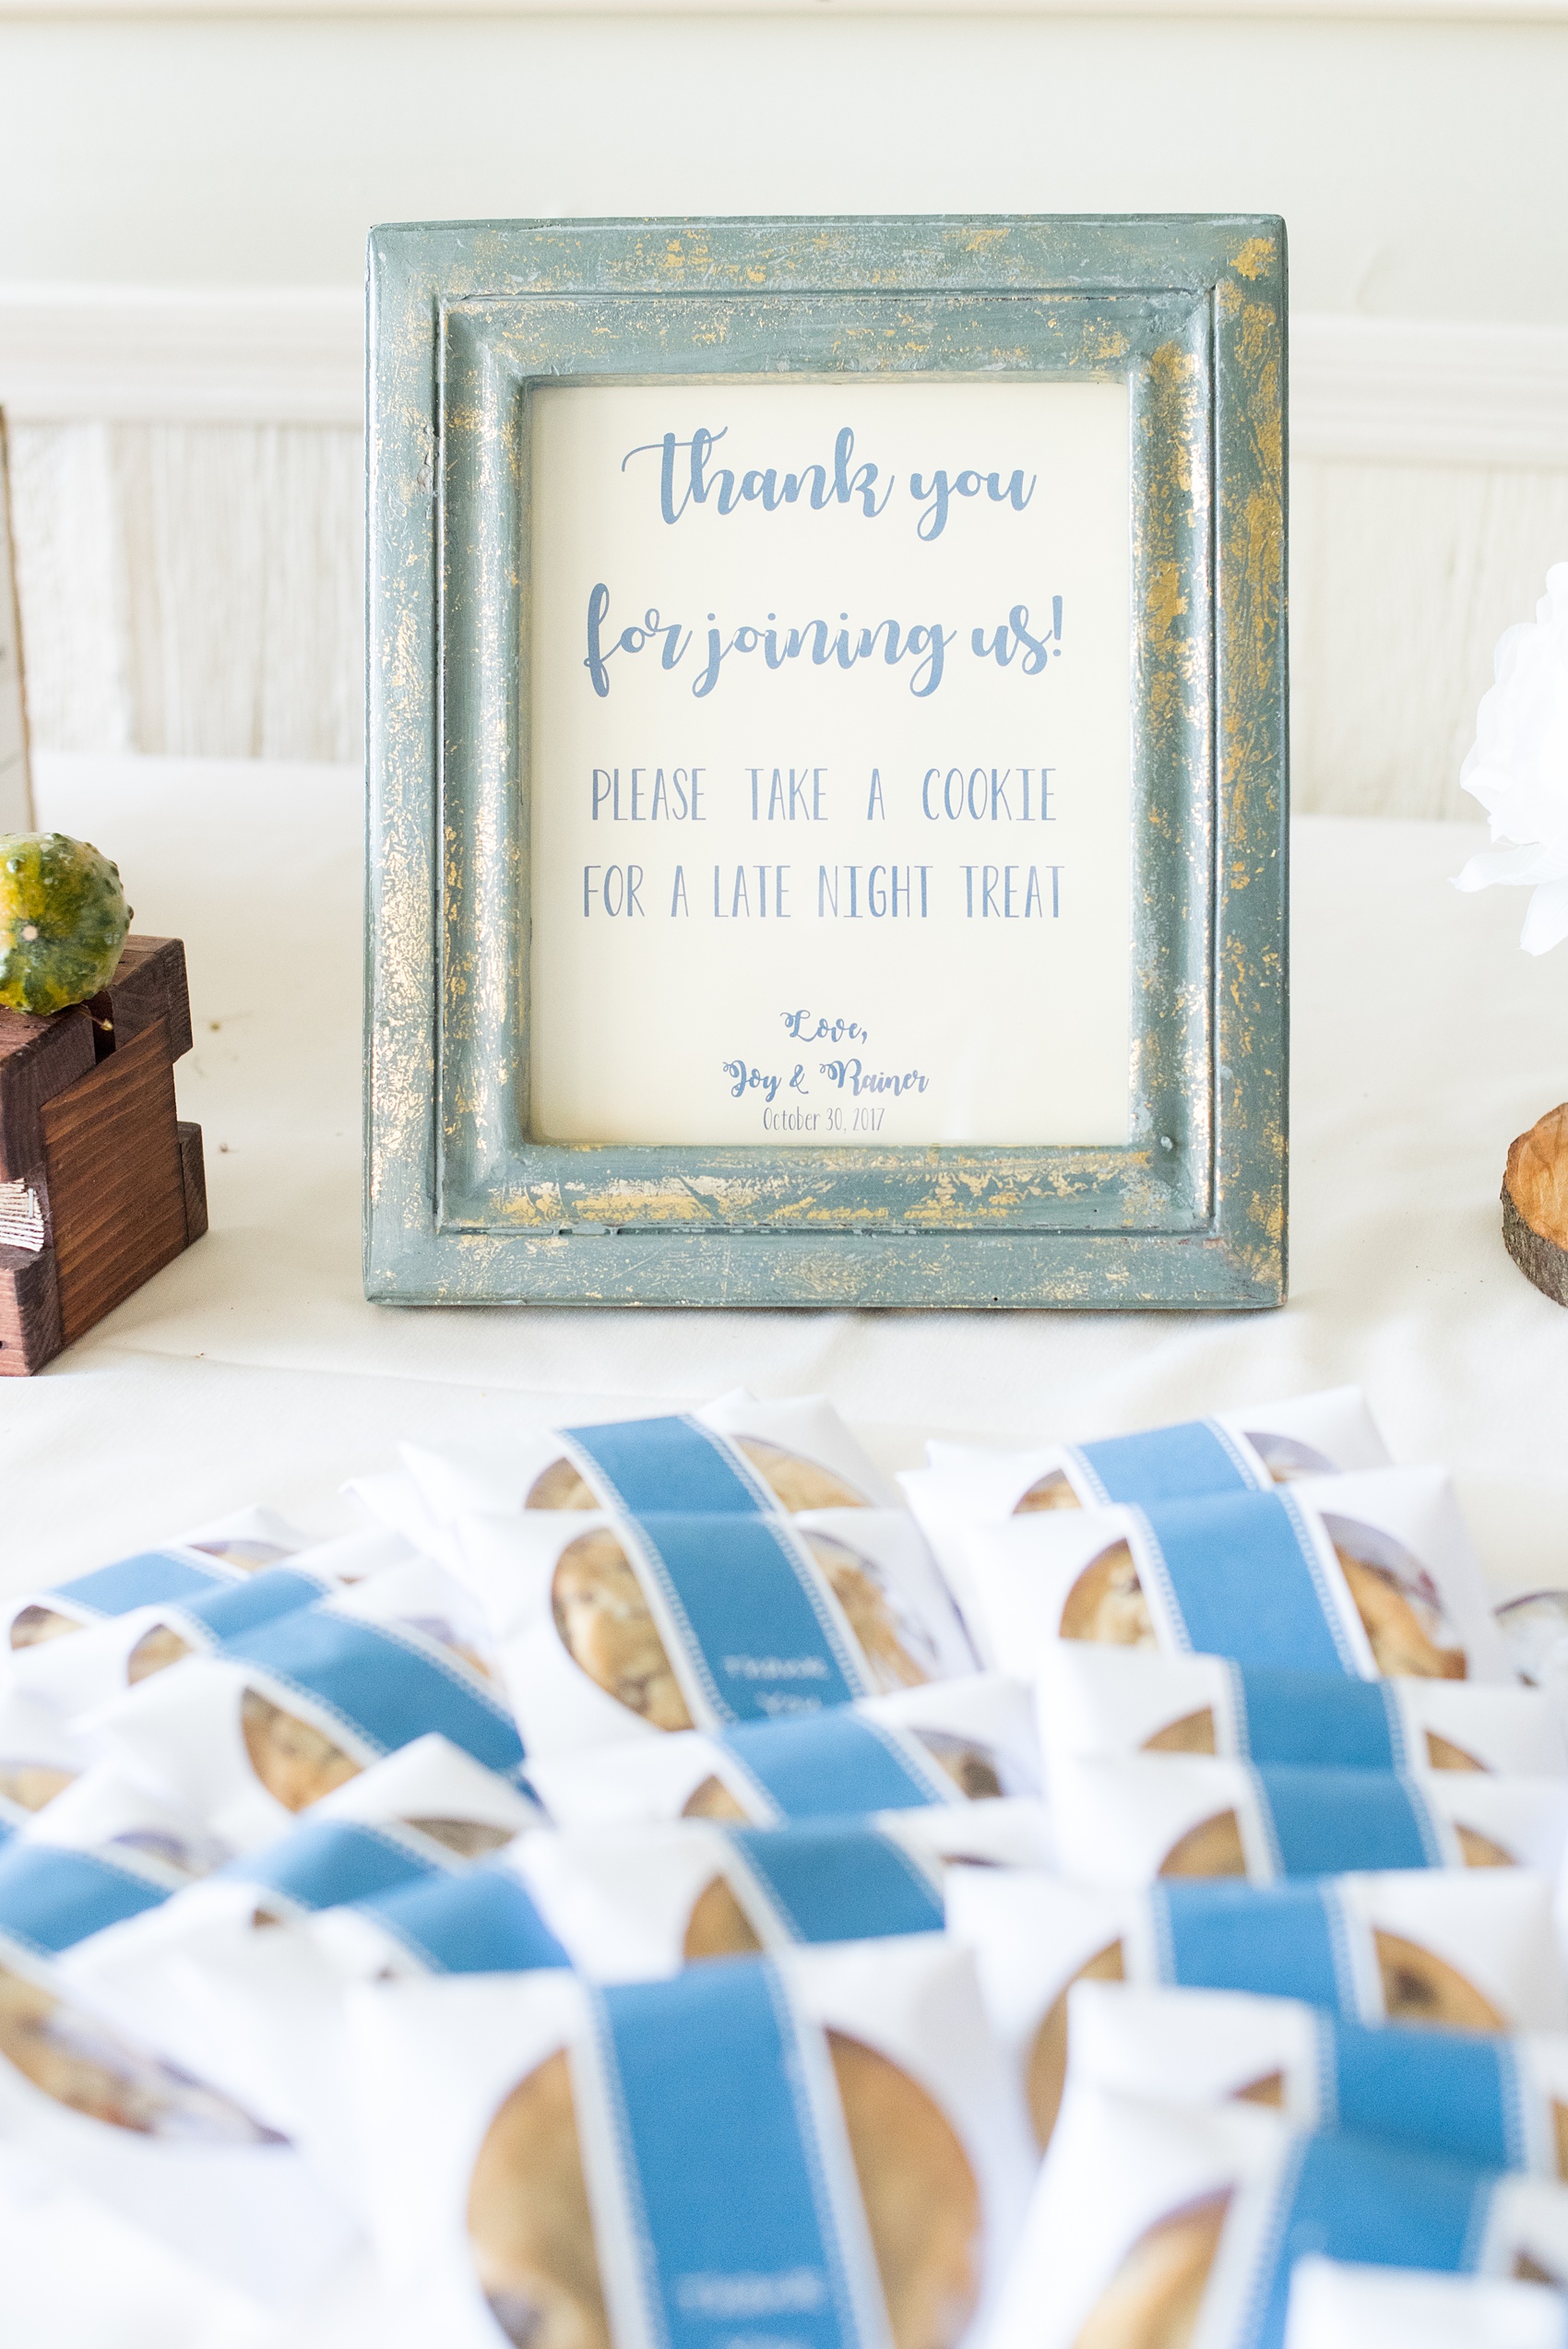 Mikkel Paige Photography photos of a wedding at Crabtree's Kittle House in Chappaqua, New York. Picture of the guest favor cookie table.